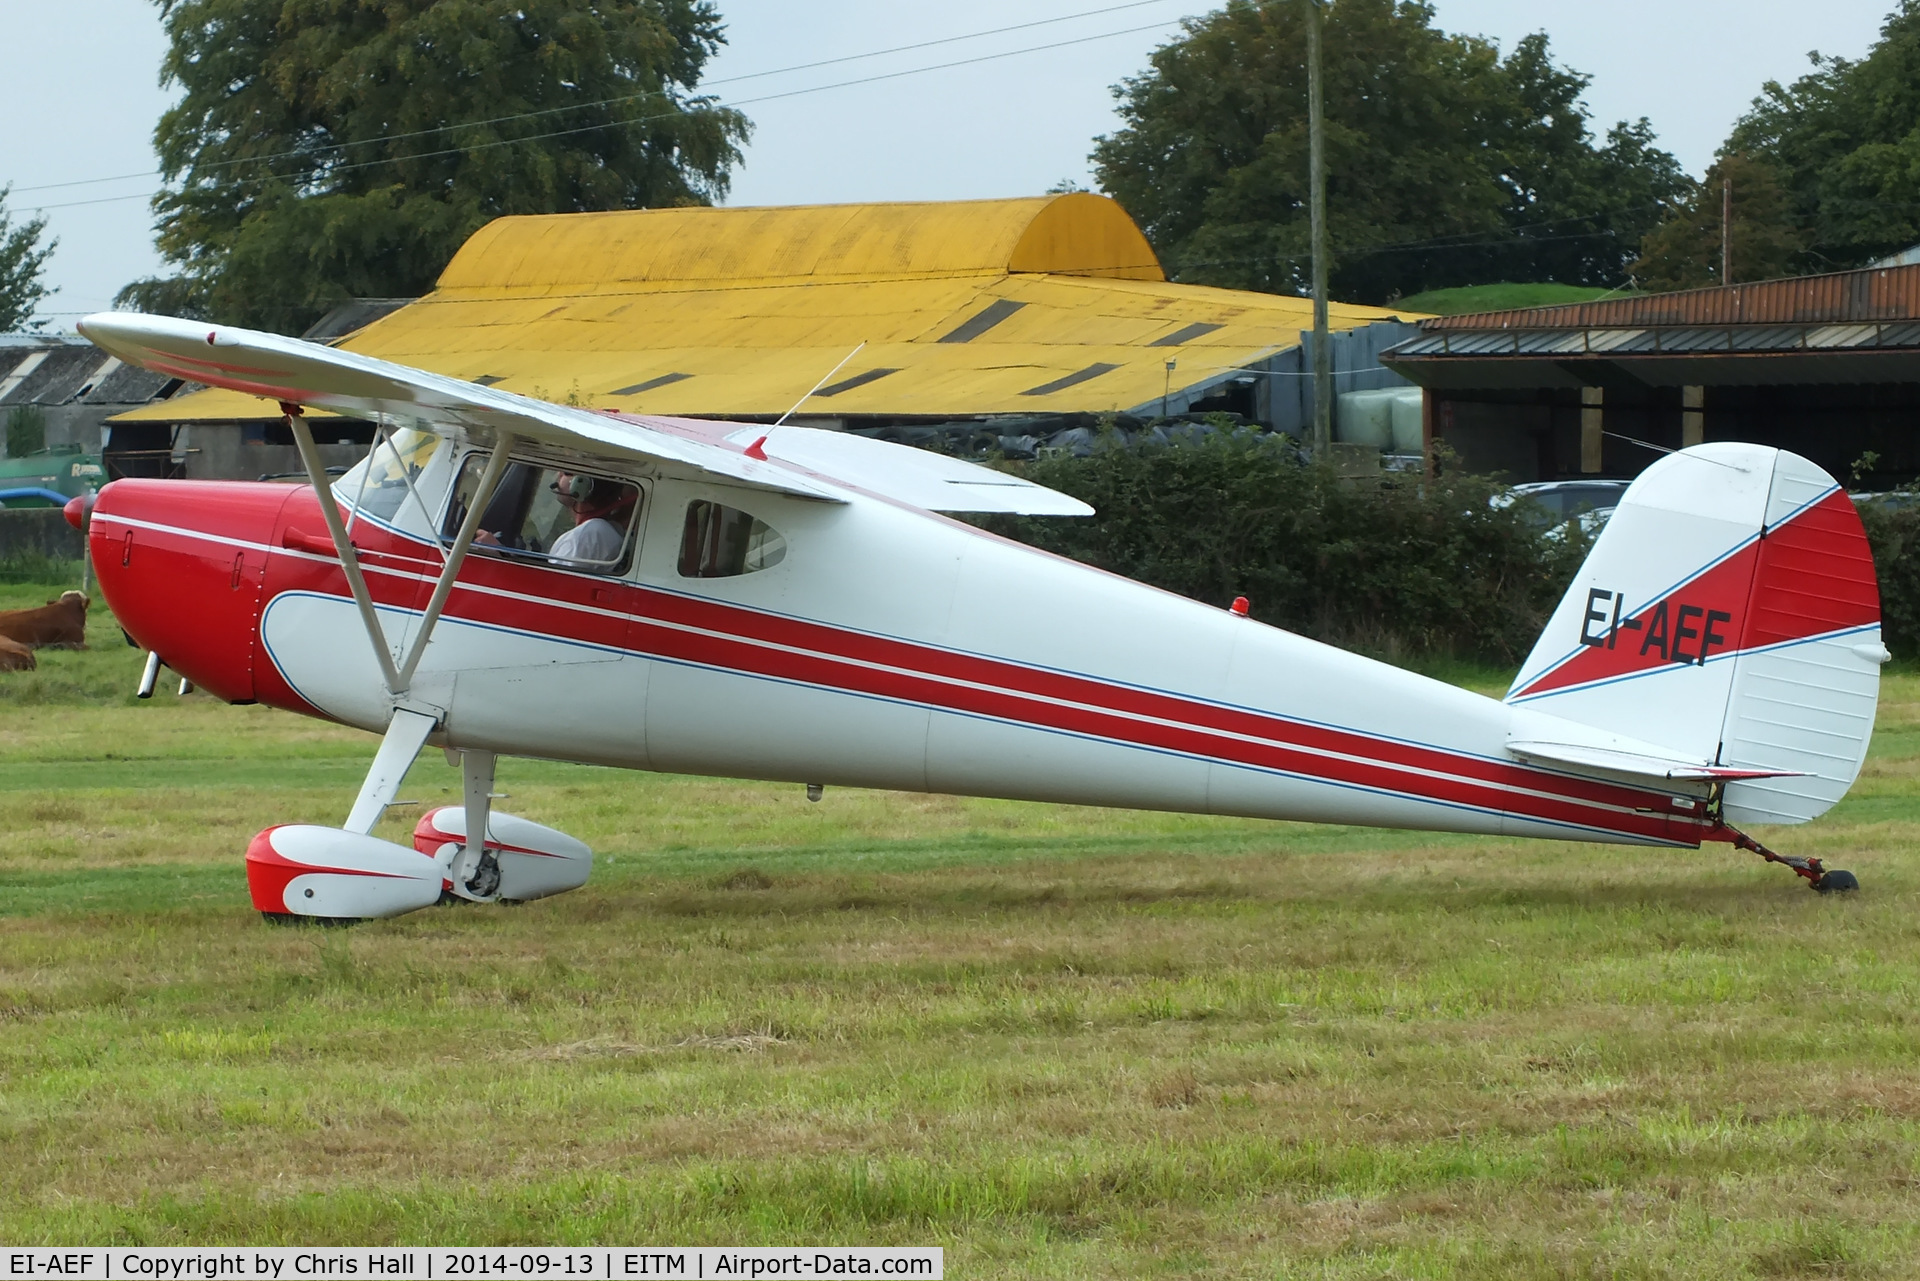 EI-AEF, 1947 Cessna 120 C/N 13692, at the Trim airfield fly in, County Meath, Ireland